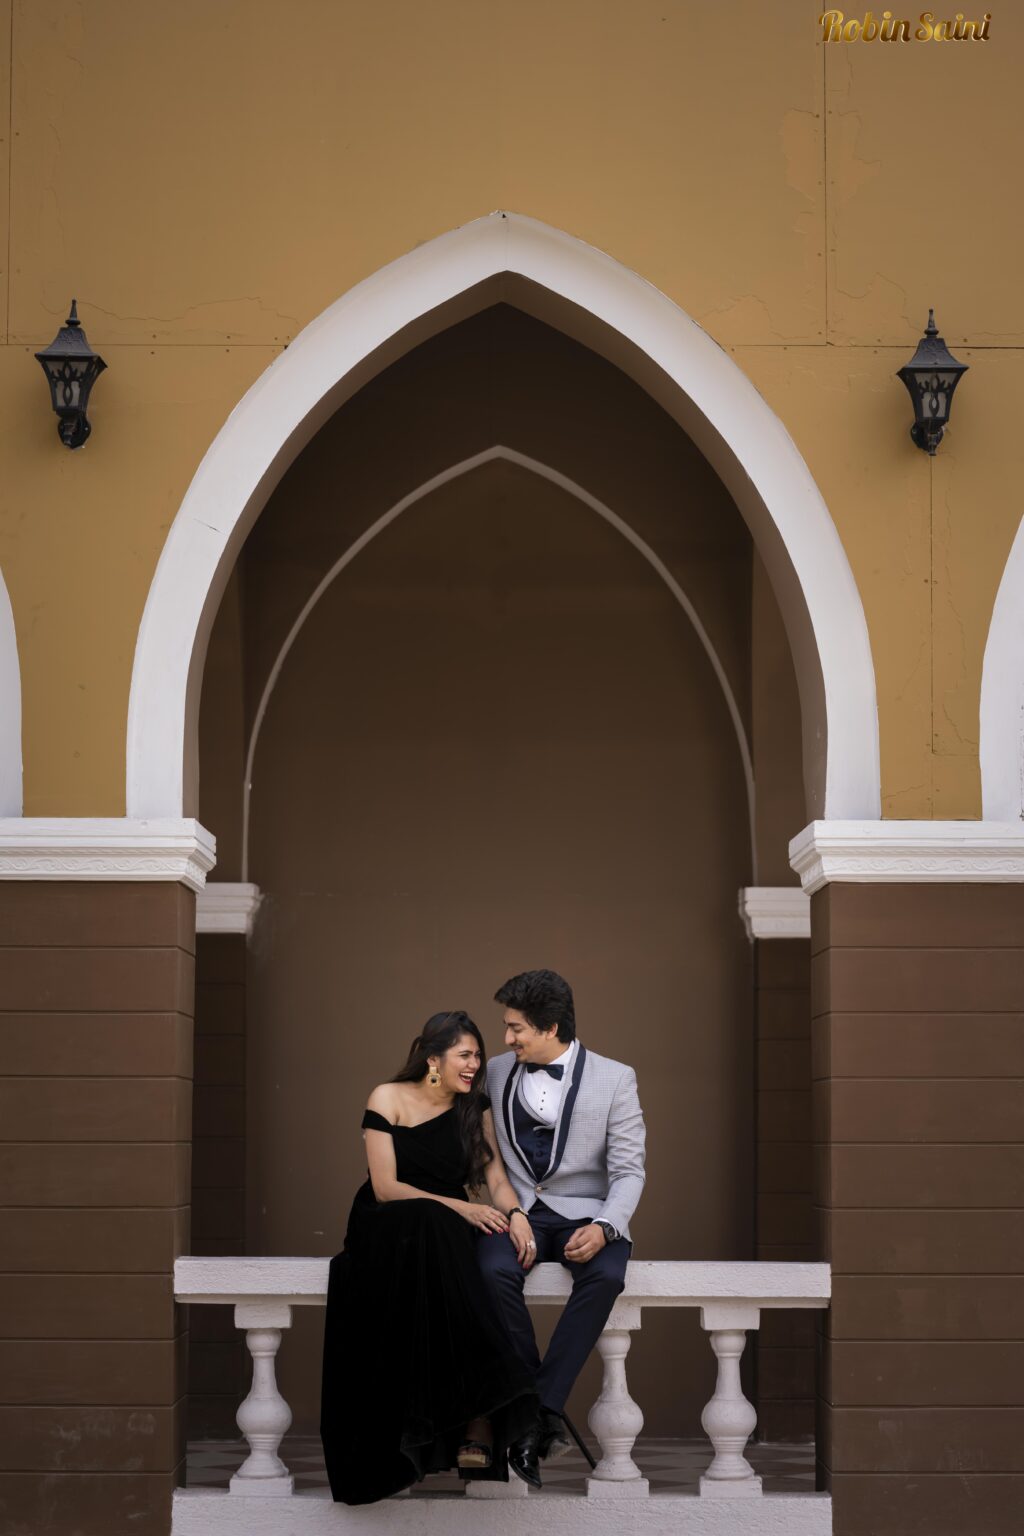 Sets In The City – Best Pre Wedding Location Shoot in Mumbai Robin